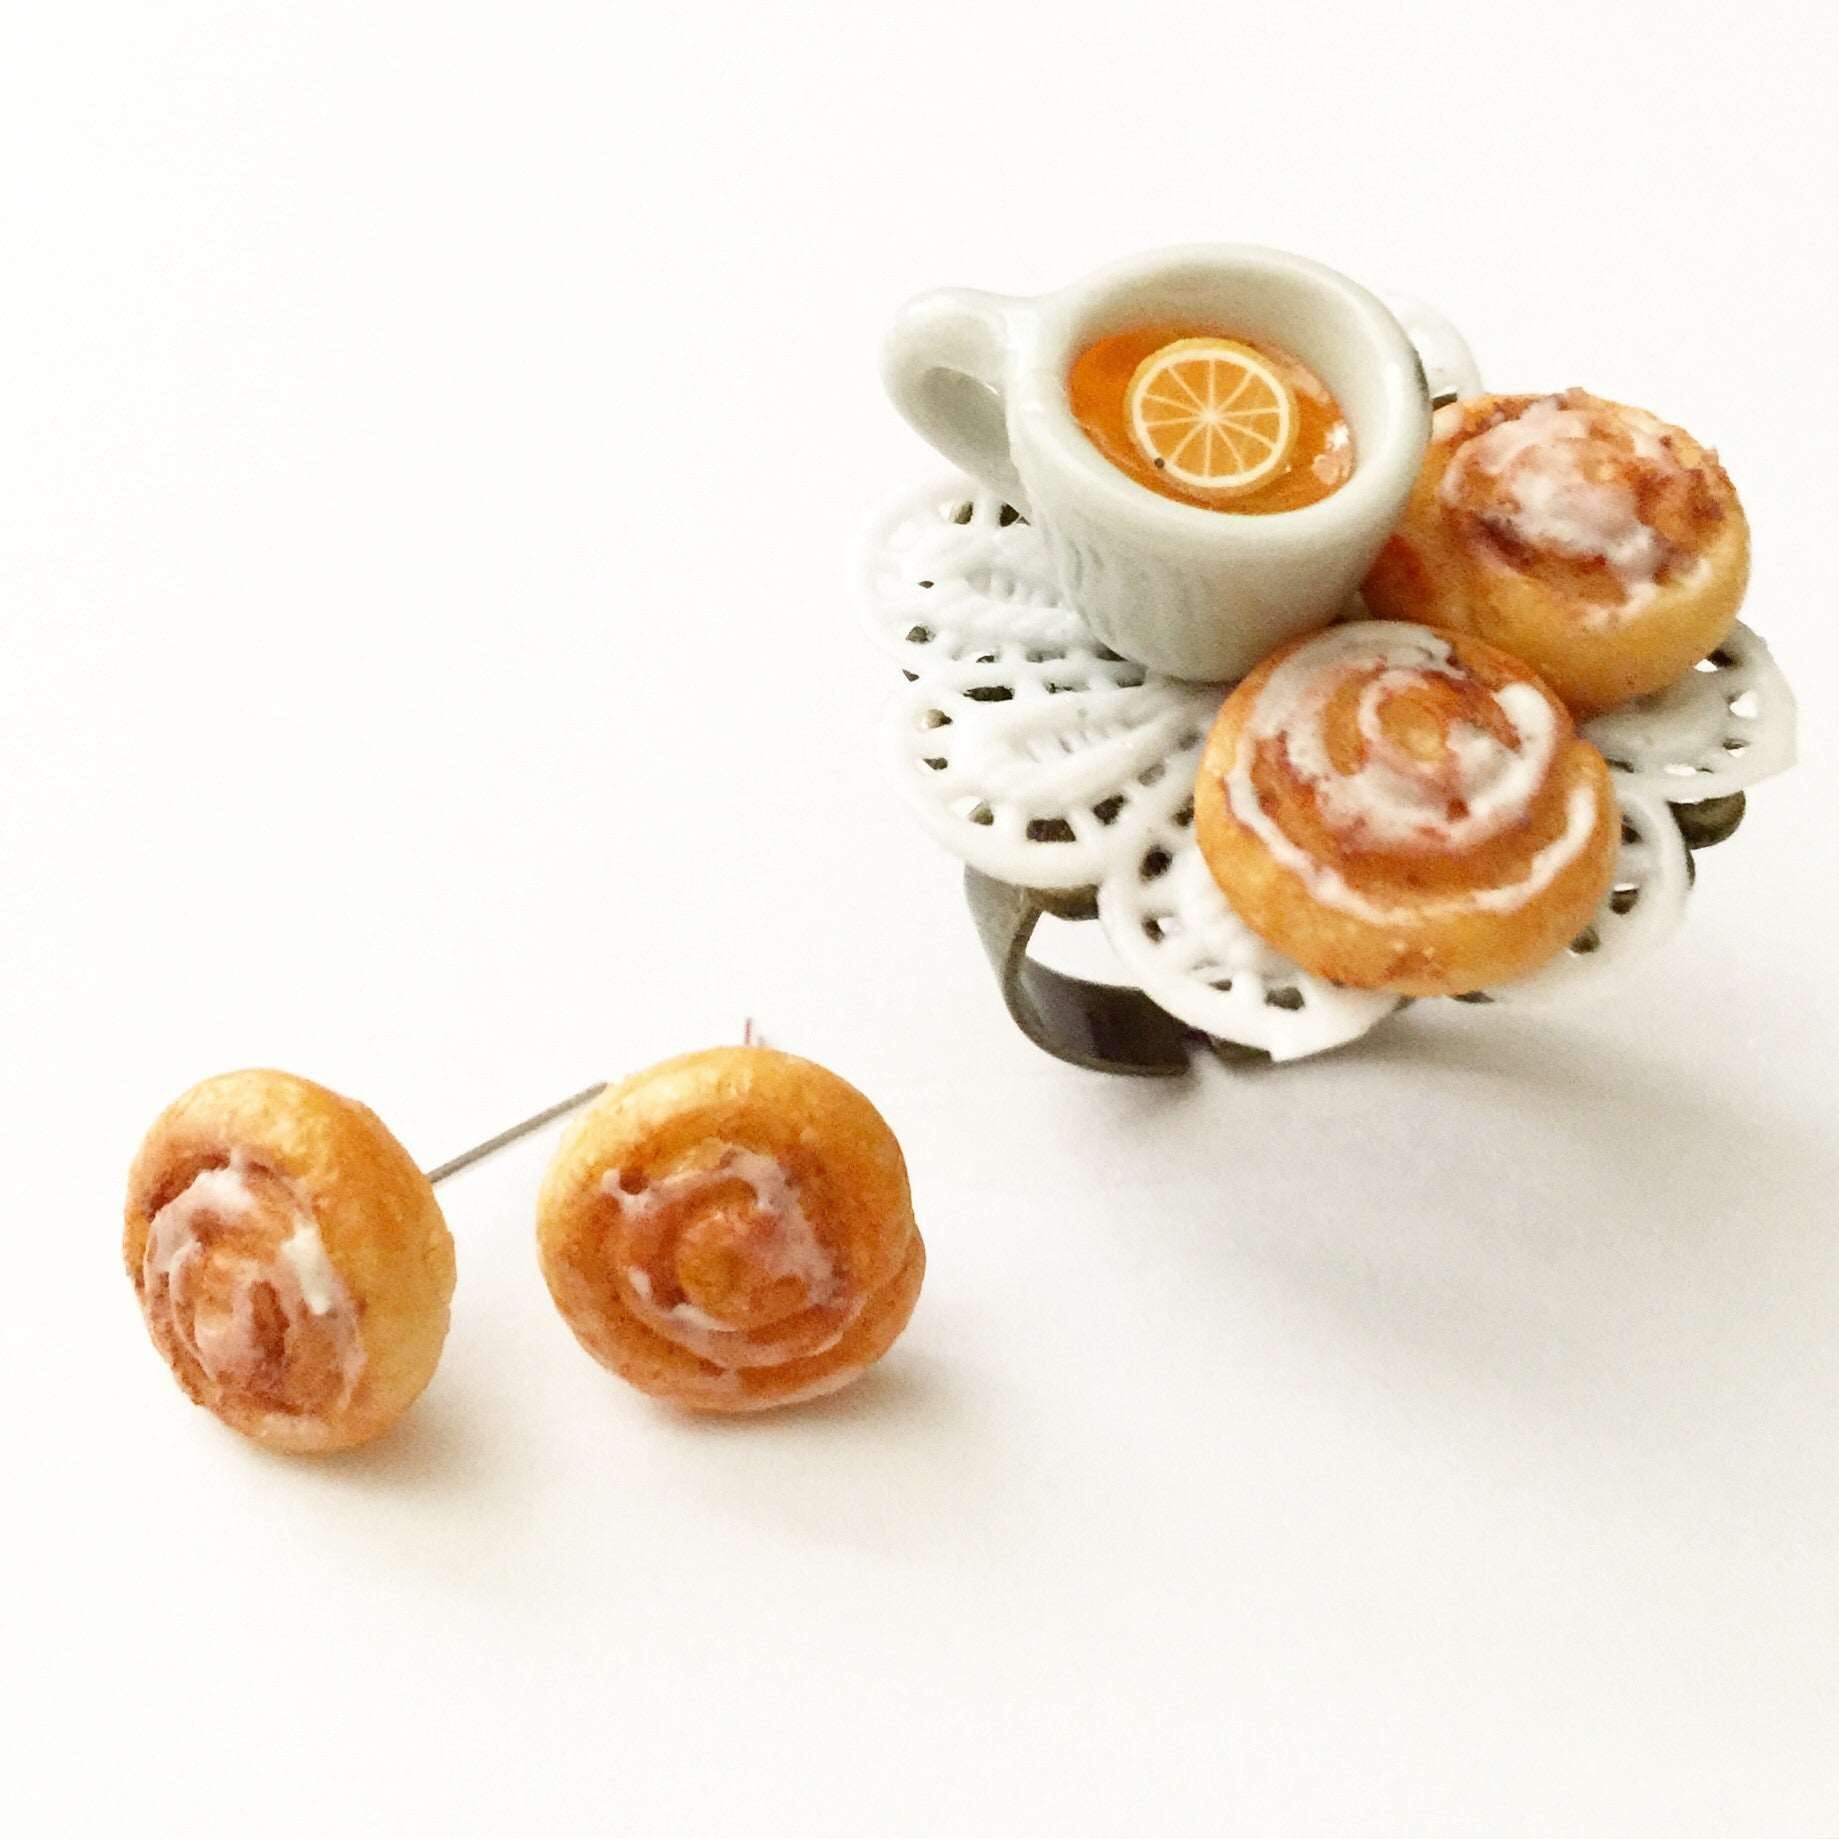 cinnamon rolls and tea ring - Jillicious charms and accessories